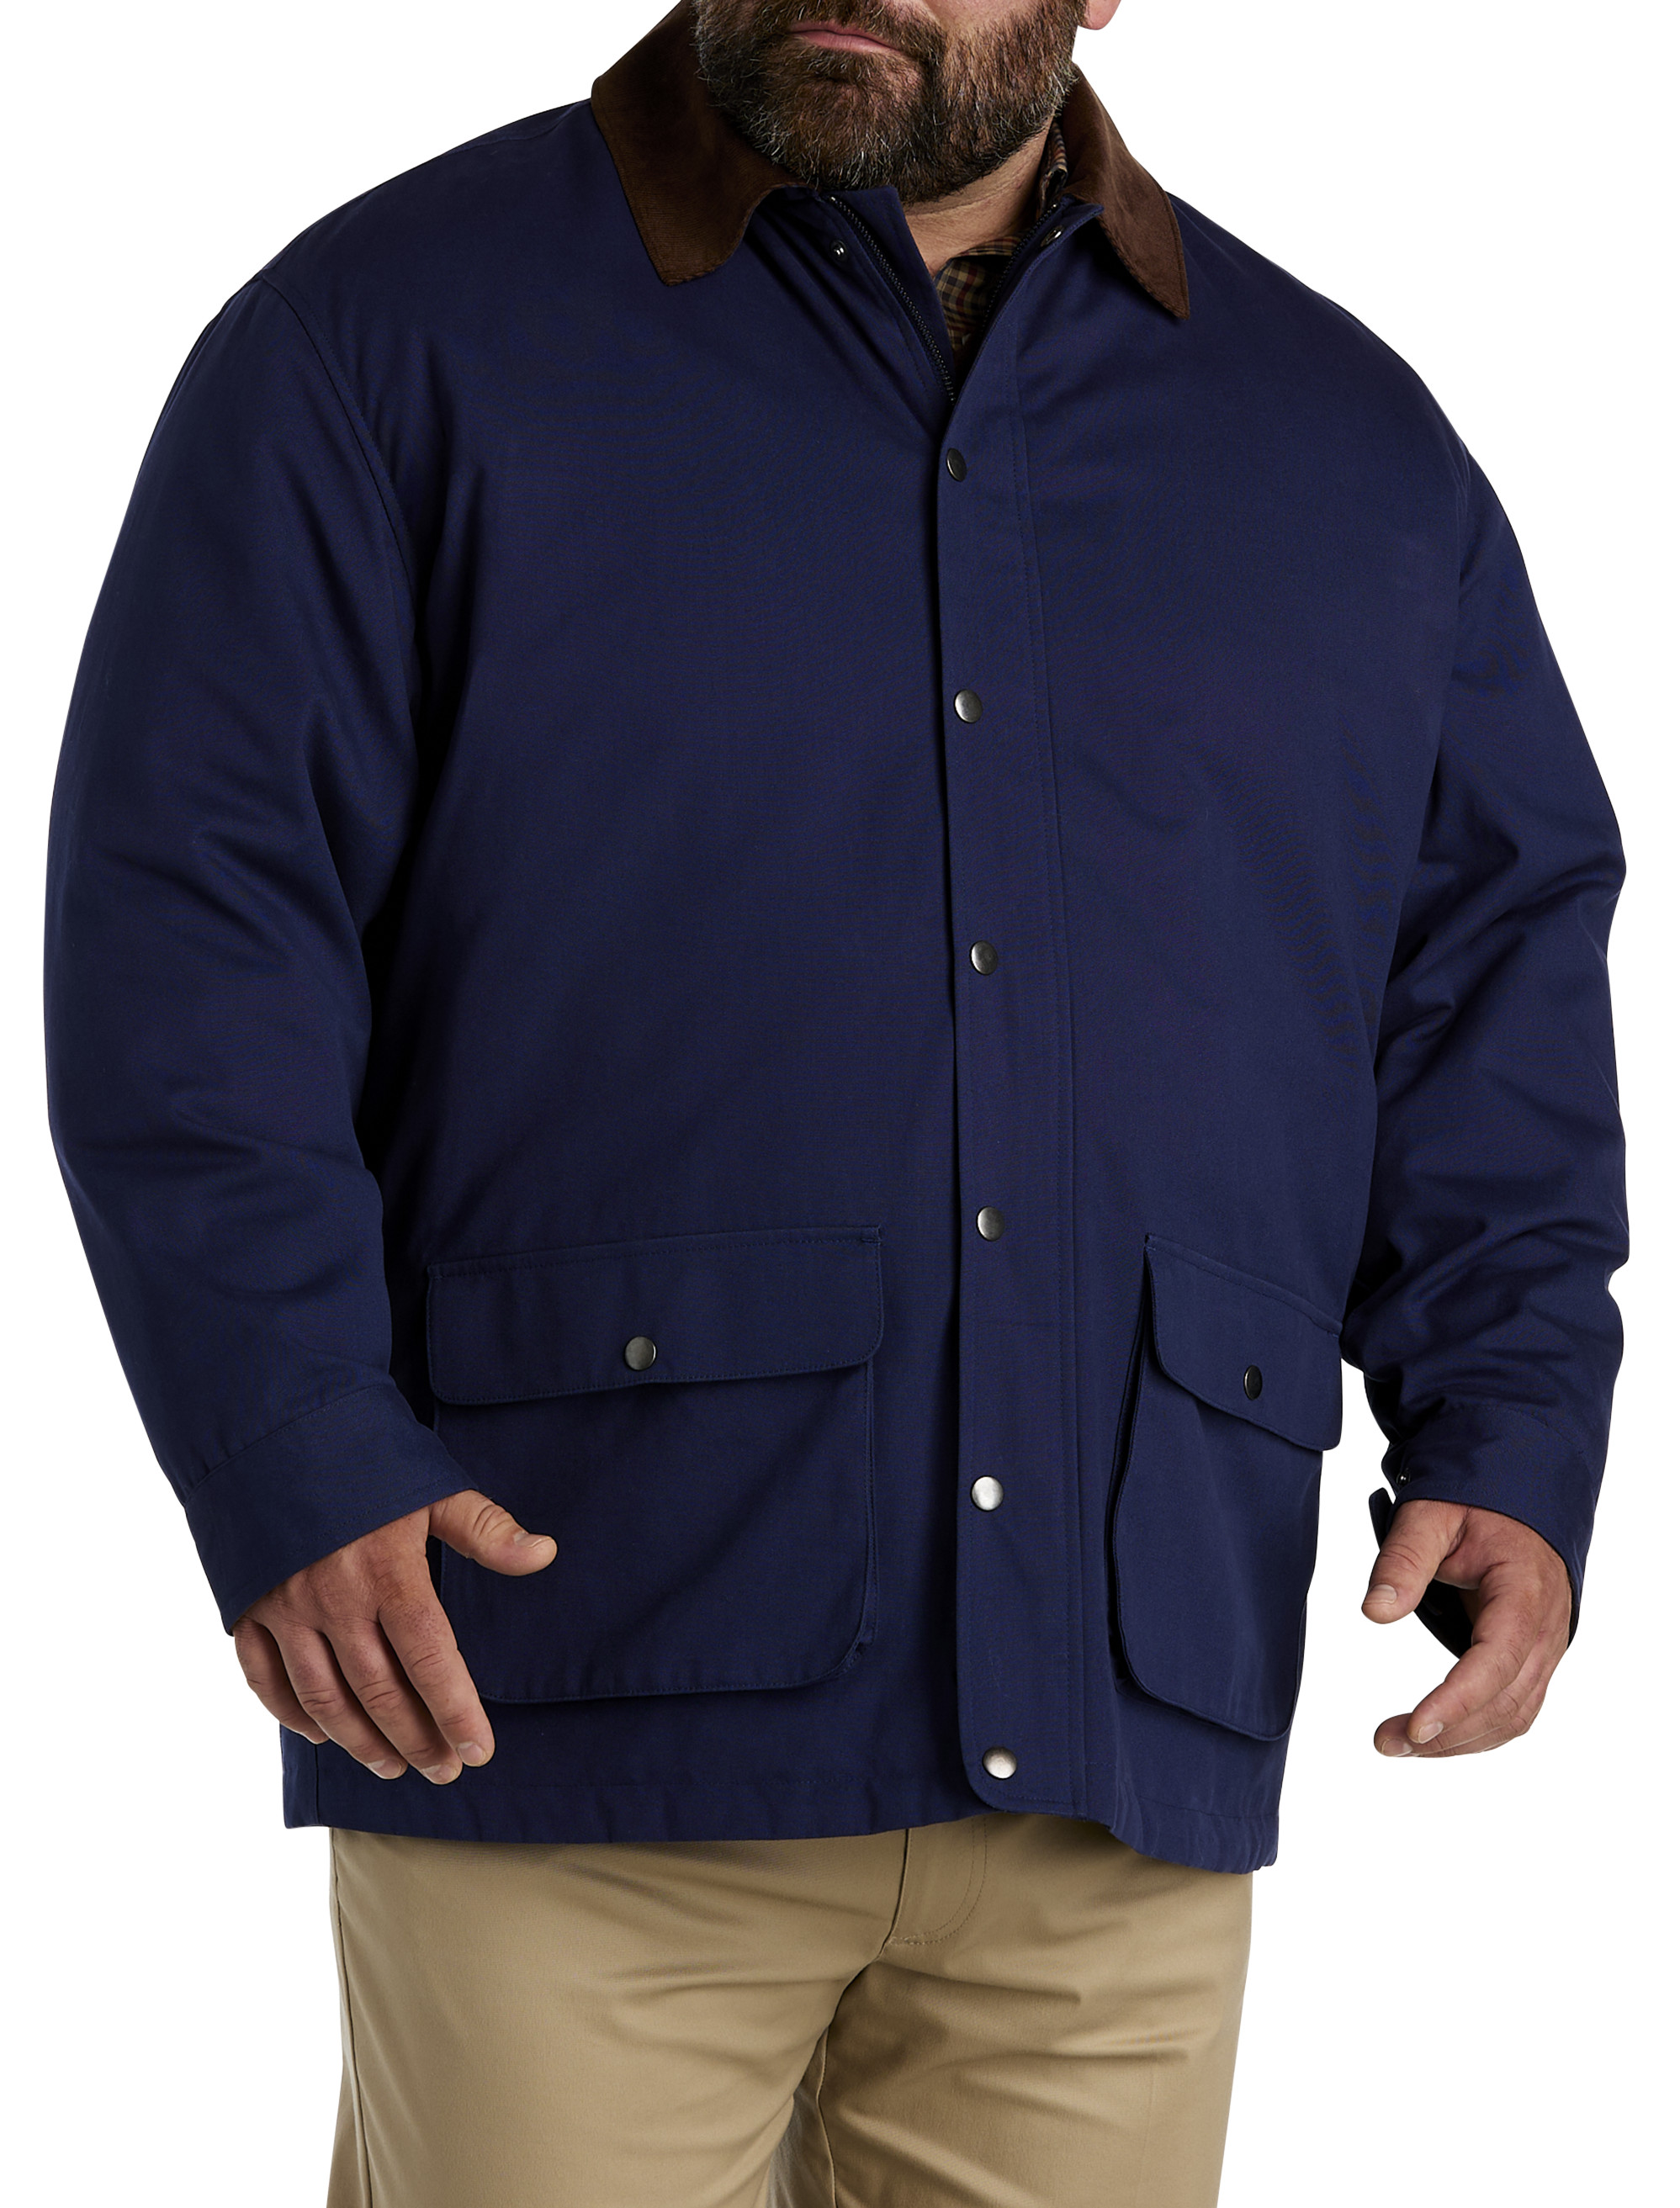 Full Sleeve Casual Jackets Mens Blue Jacket, Size: M to XXL